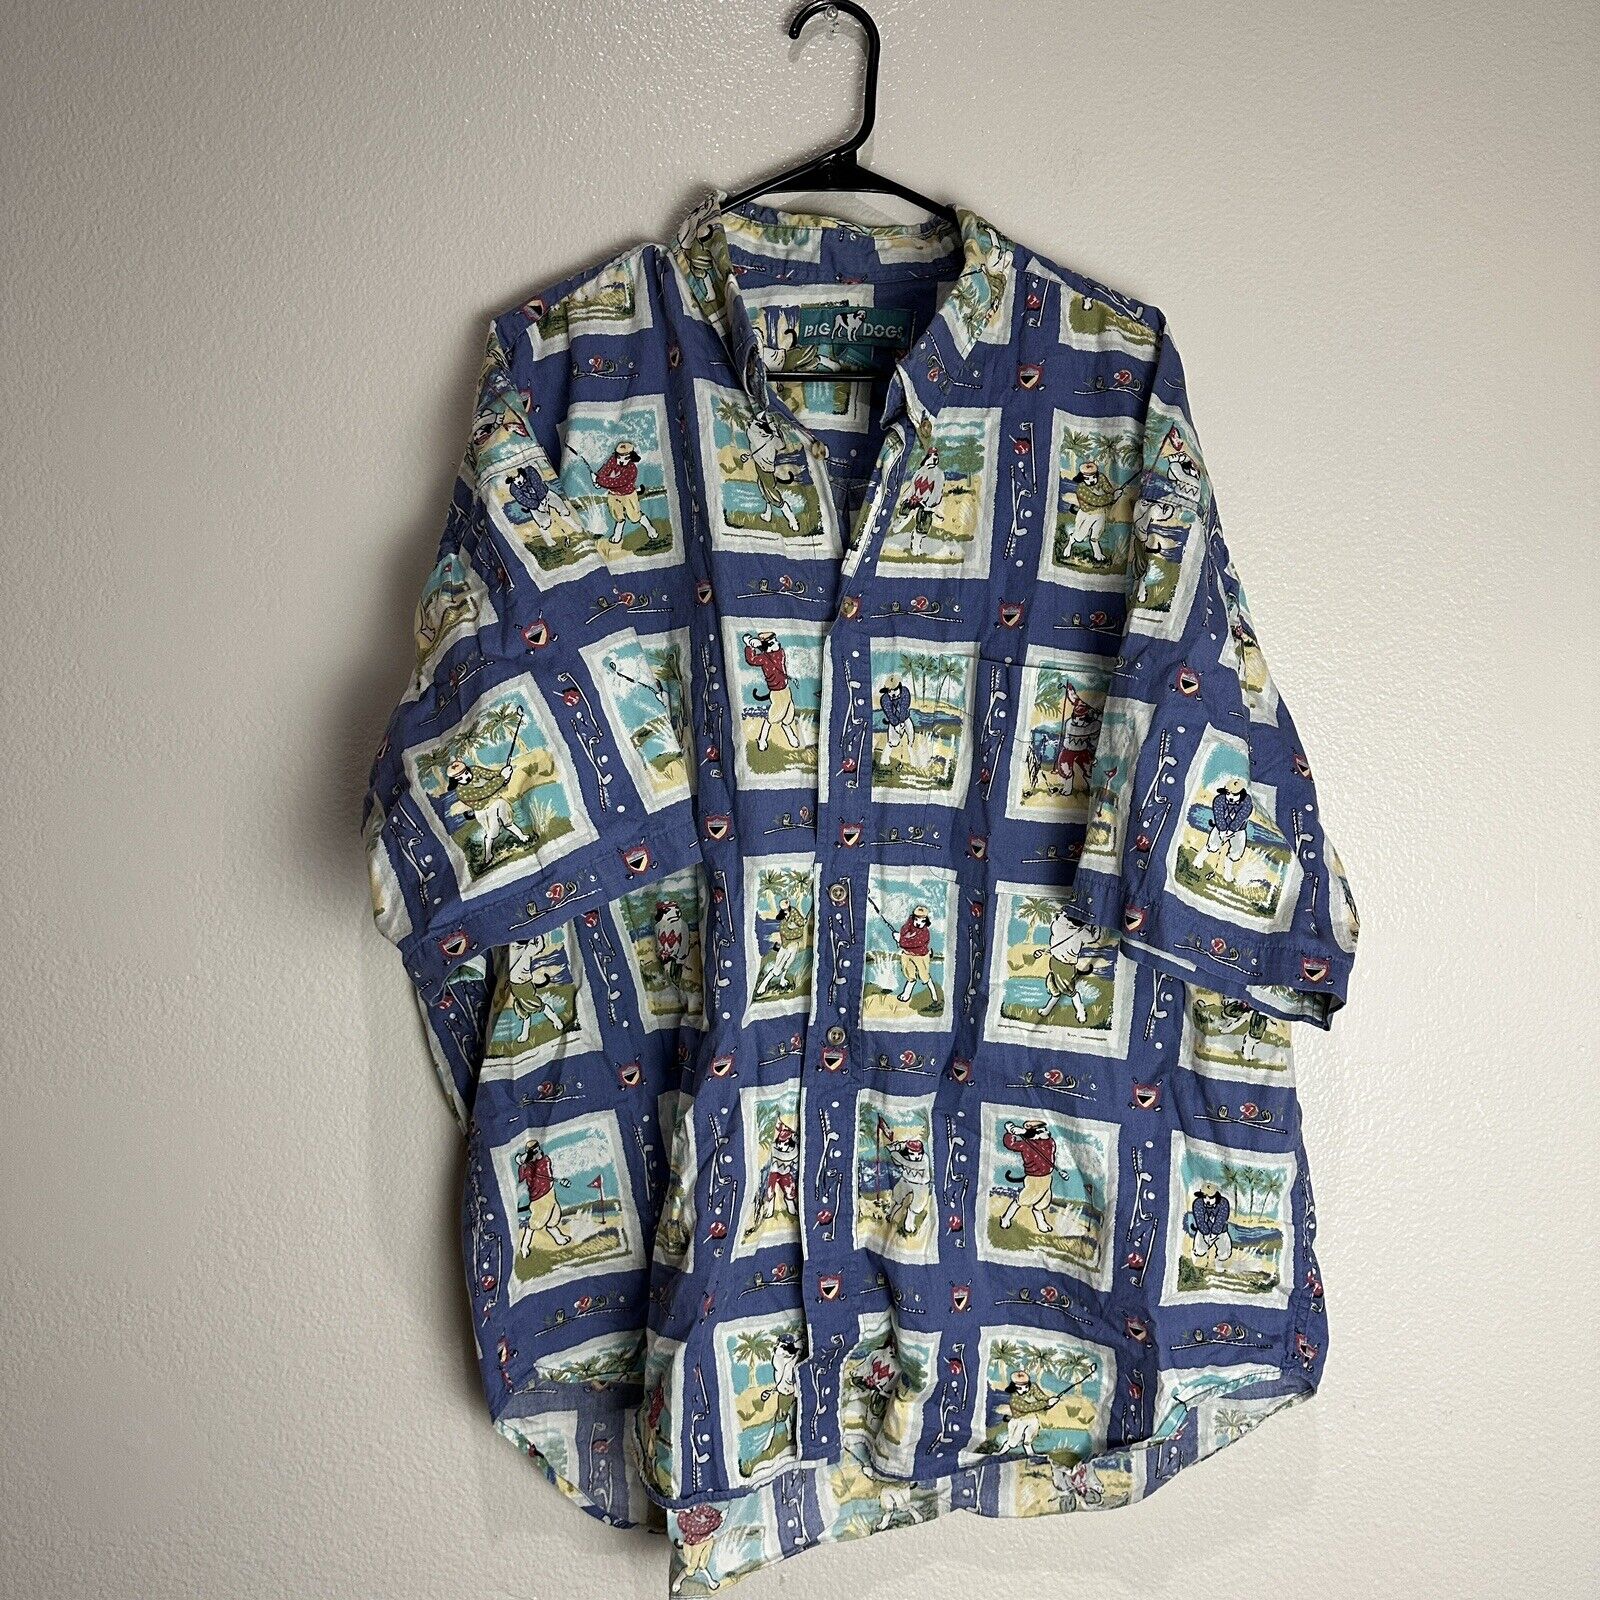 Big Dogs Golf Vintage Button Up Shirt Size 3X